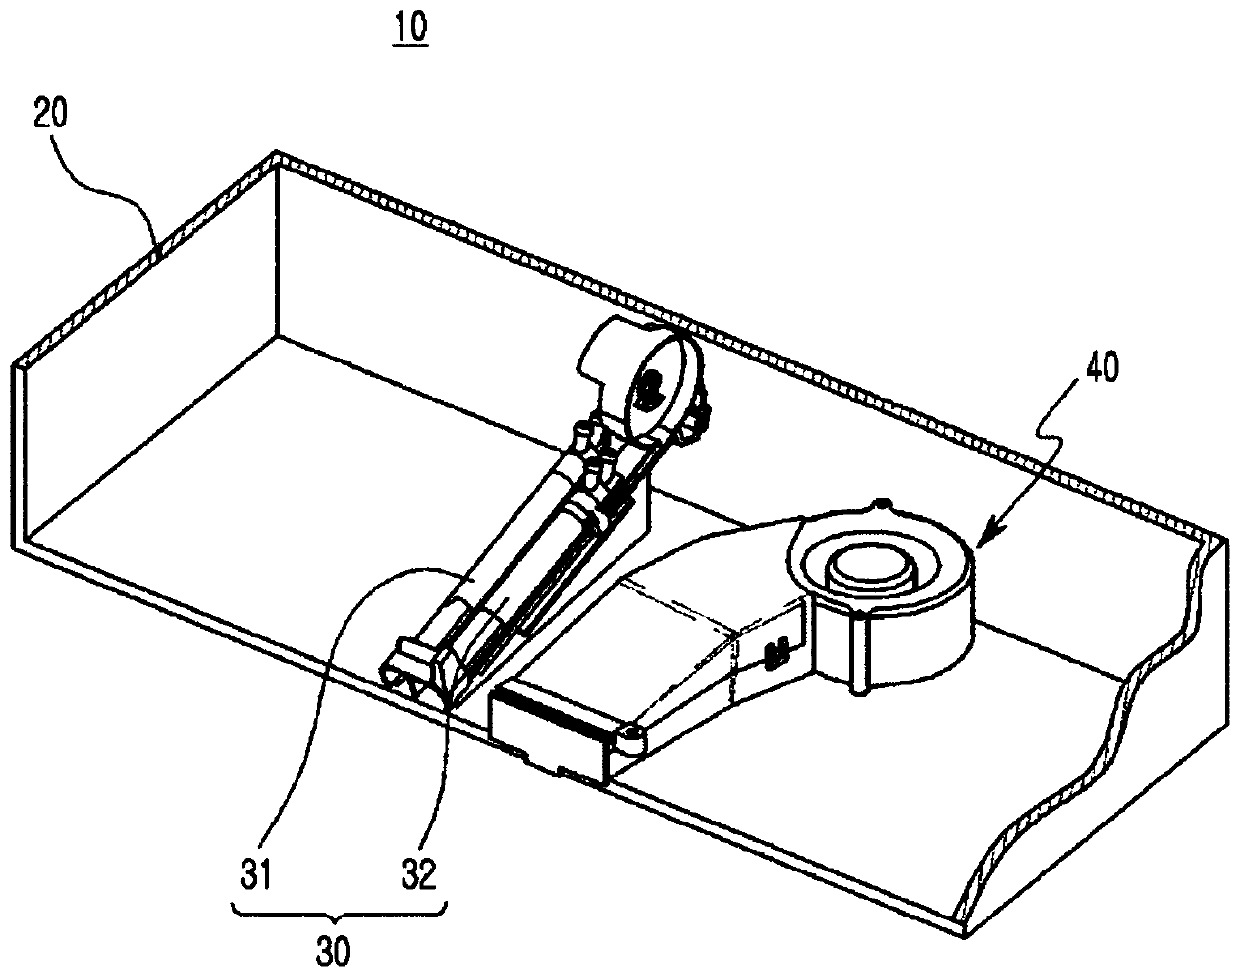 Bidet apparatus having separated cleaning-and-bidet nozzle structures for providing sanitary visibility